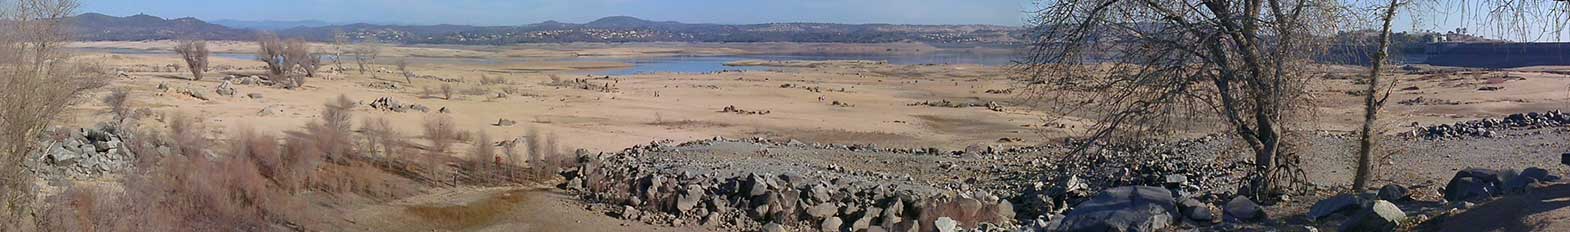 View of Folsome Lake from Beals Point during the California drought in 2014